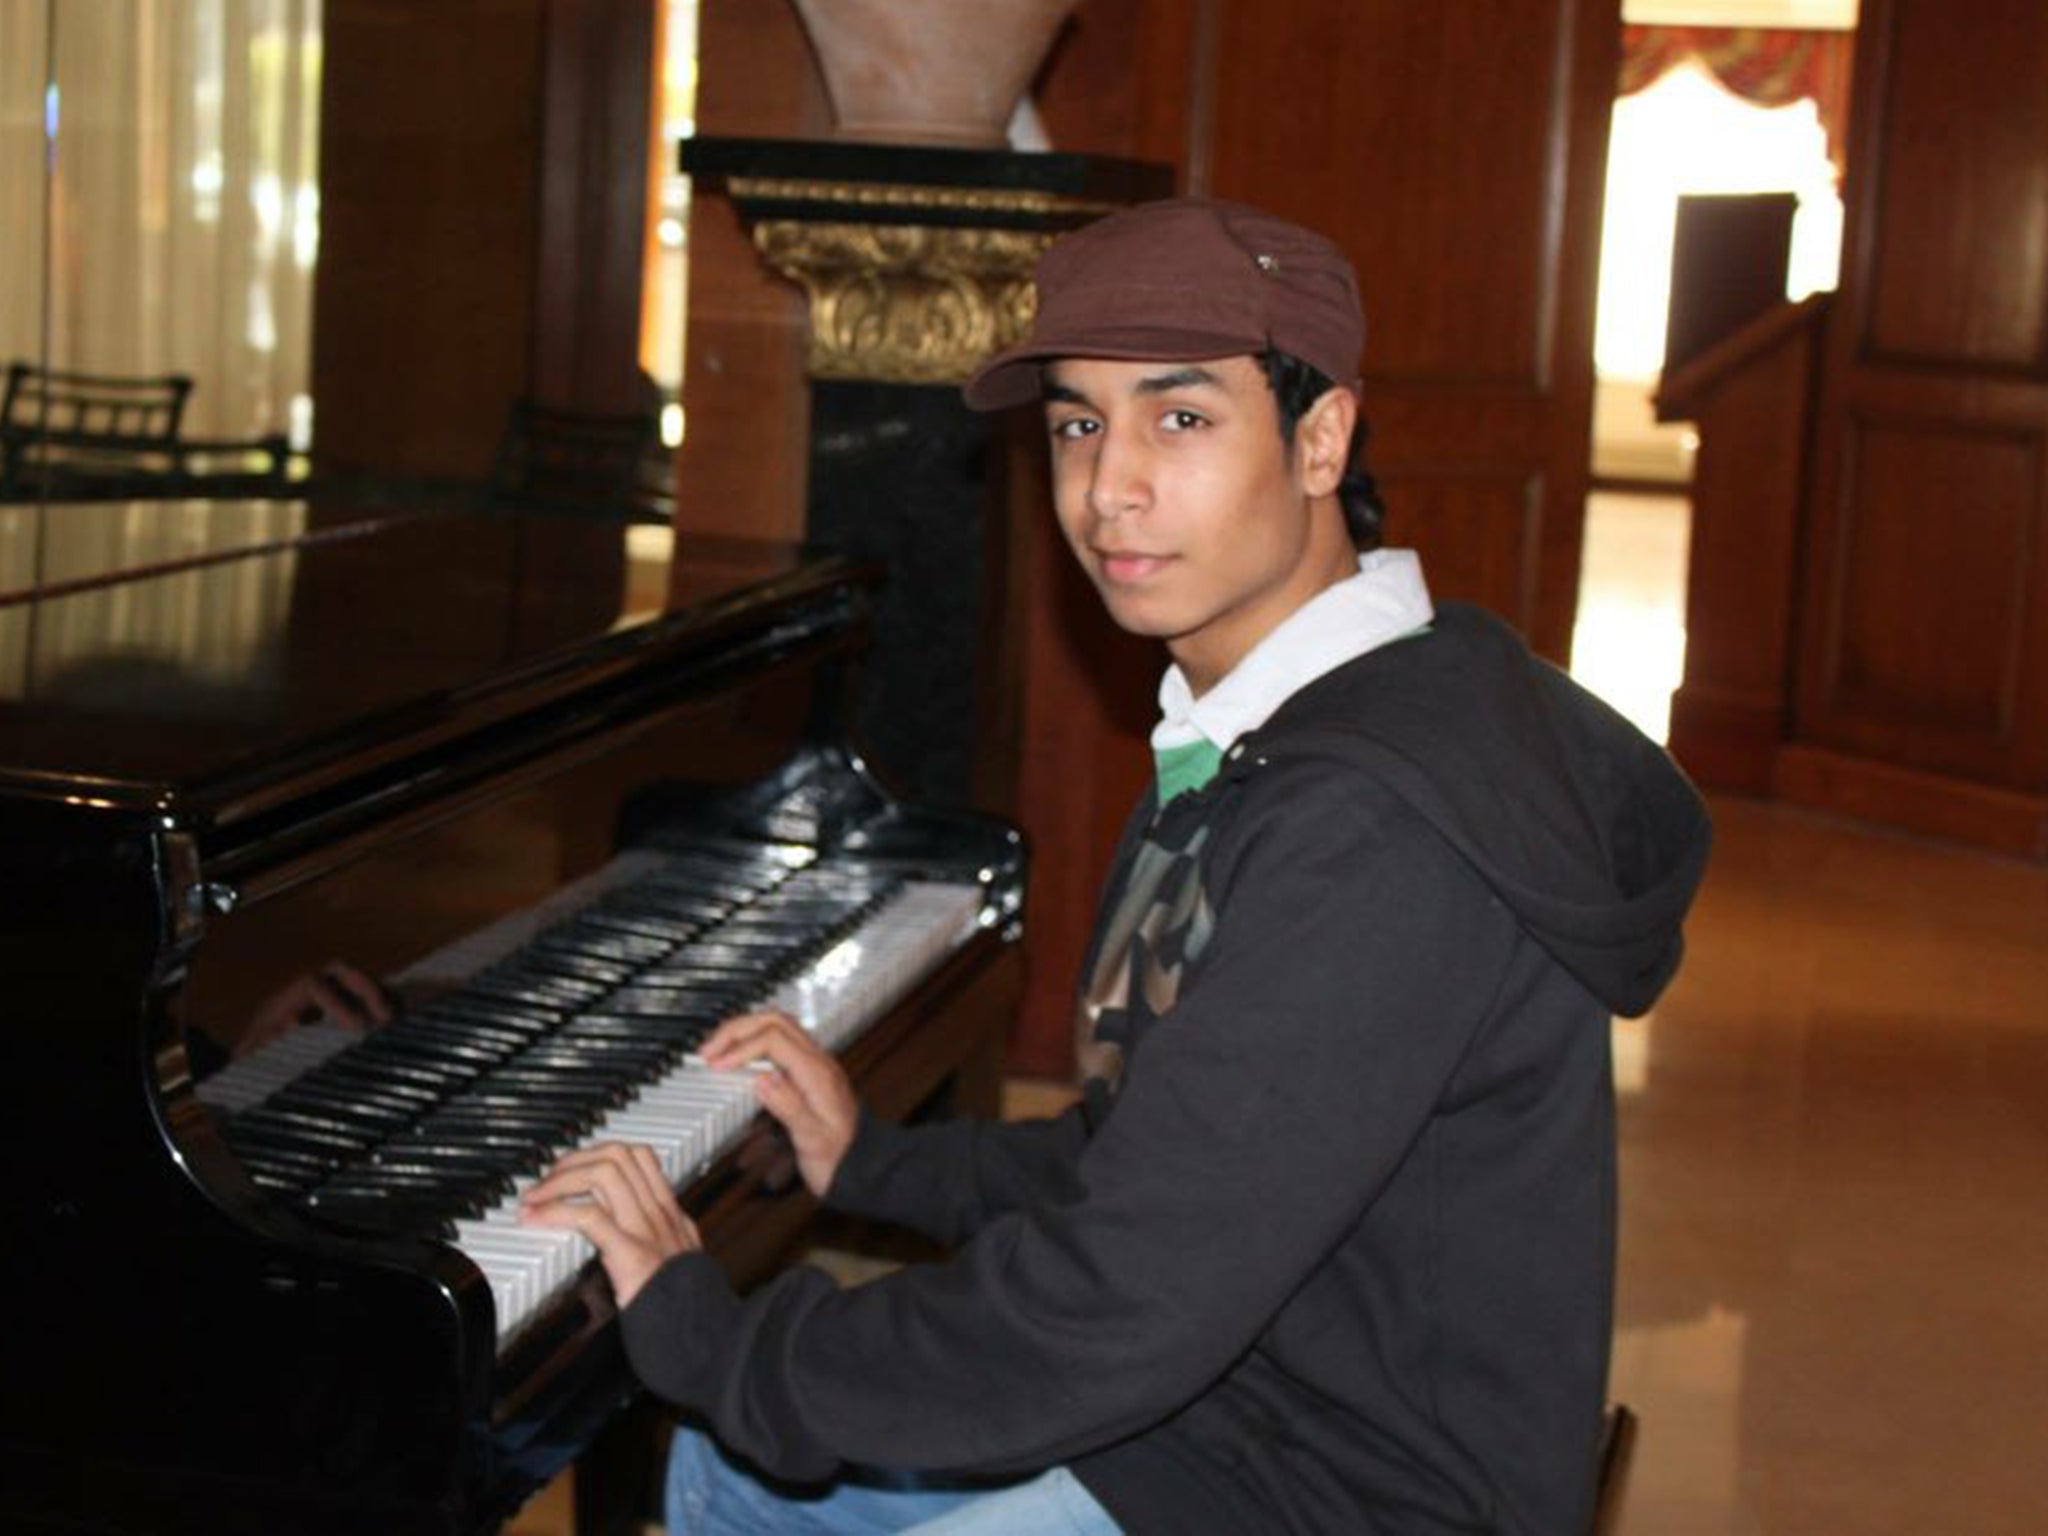 Family fear Ali Mohammed al-Nimr, now 21, will soon be executed by Saudi government 